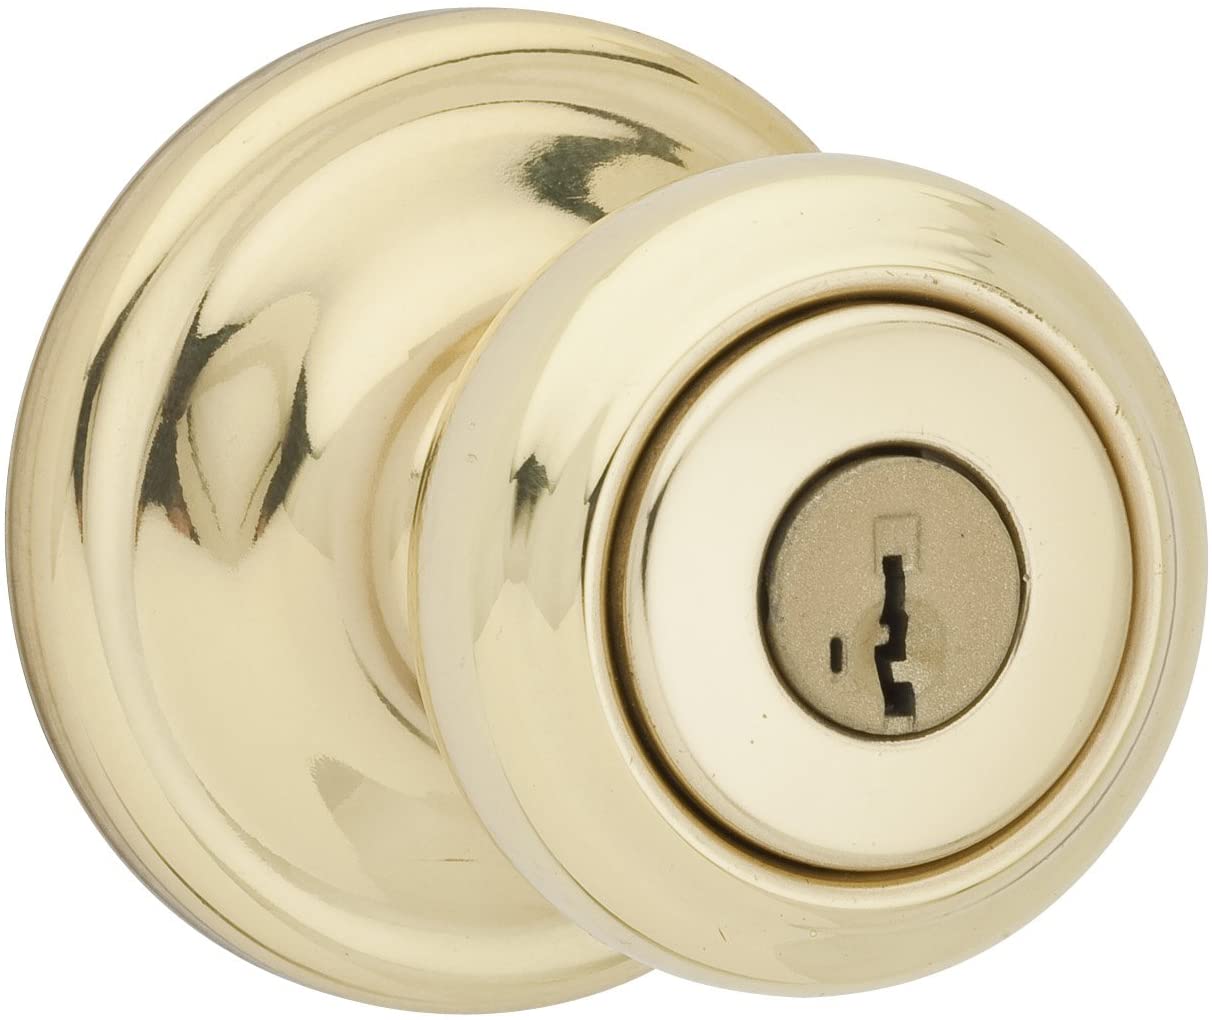 Kwikset Cameron Keyed Entry Door Knob with Microban Antimicrobial Protection featuring SmartKey Security in Polished Brass - 97402-742 B110-KS454